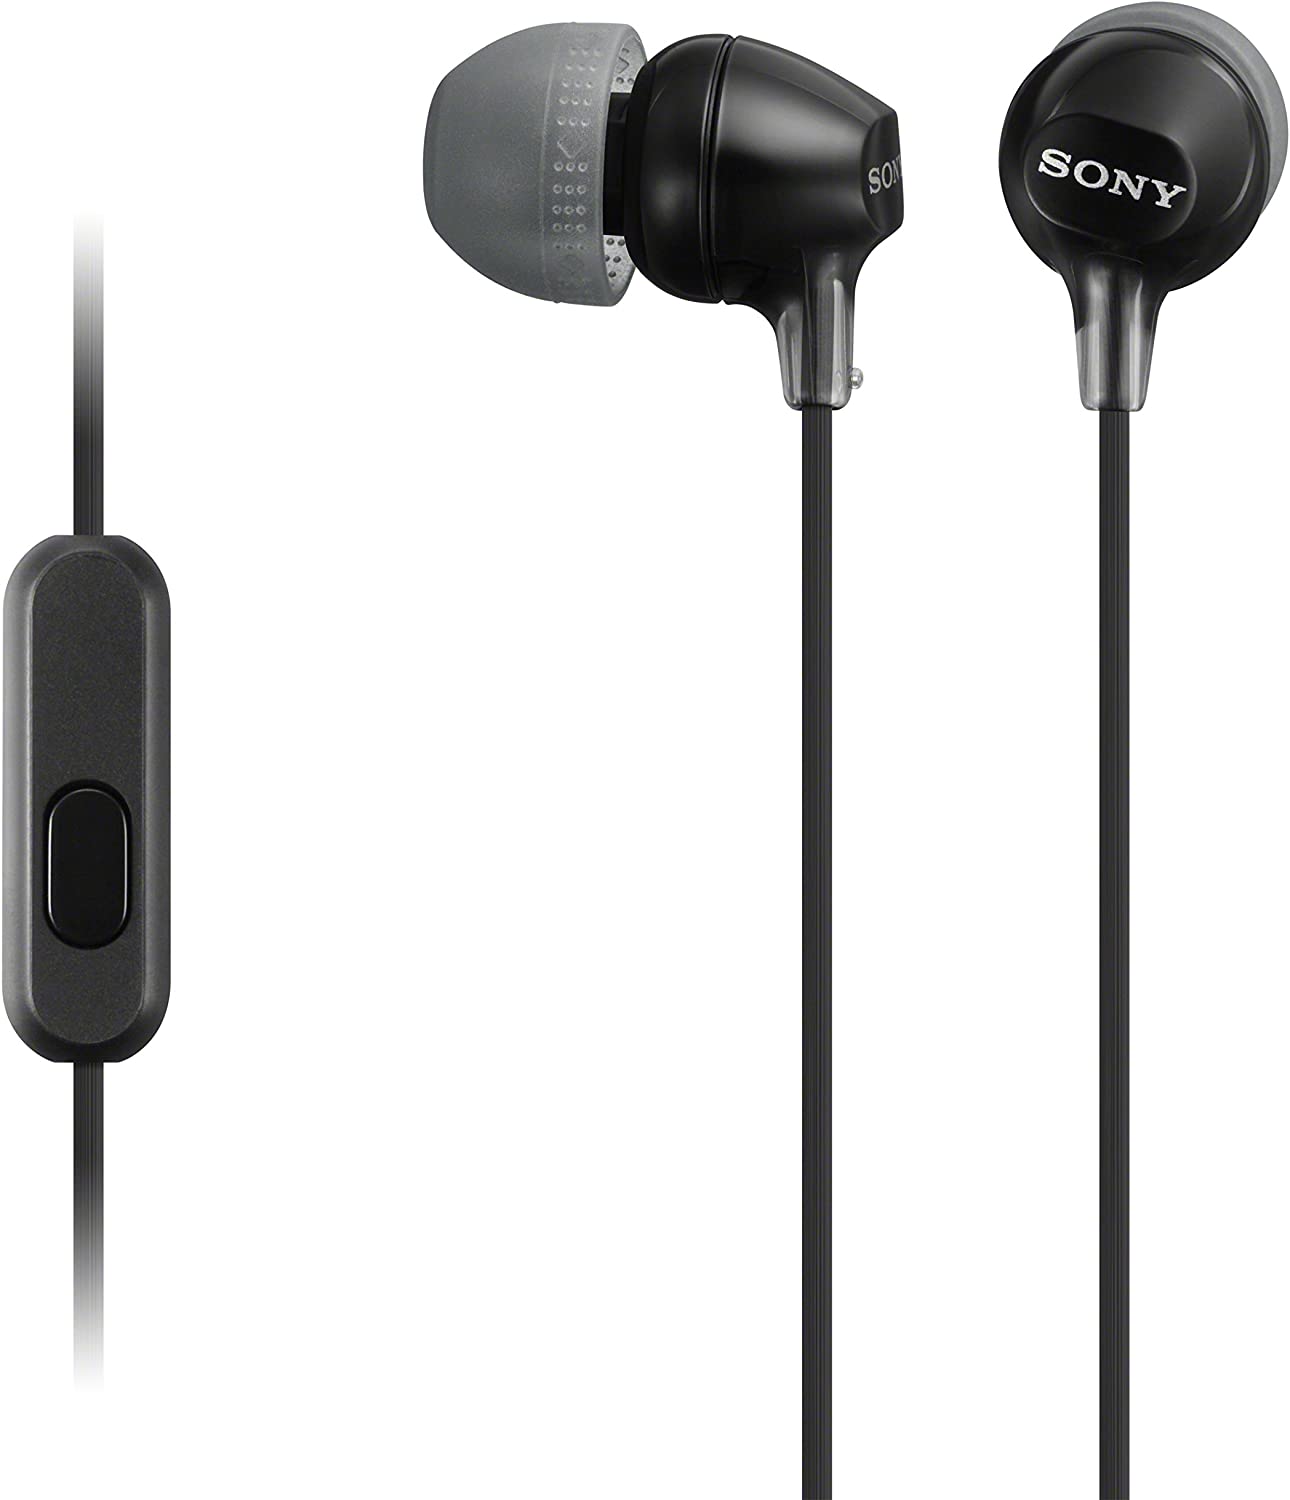 MDR-EX15AP Wired In-ear Headphones with Microphone